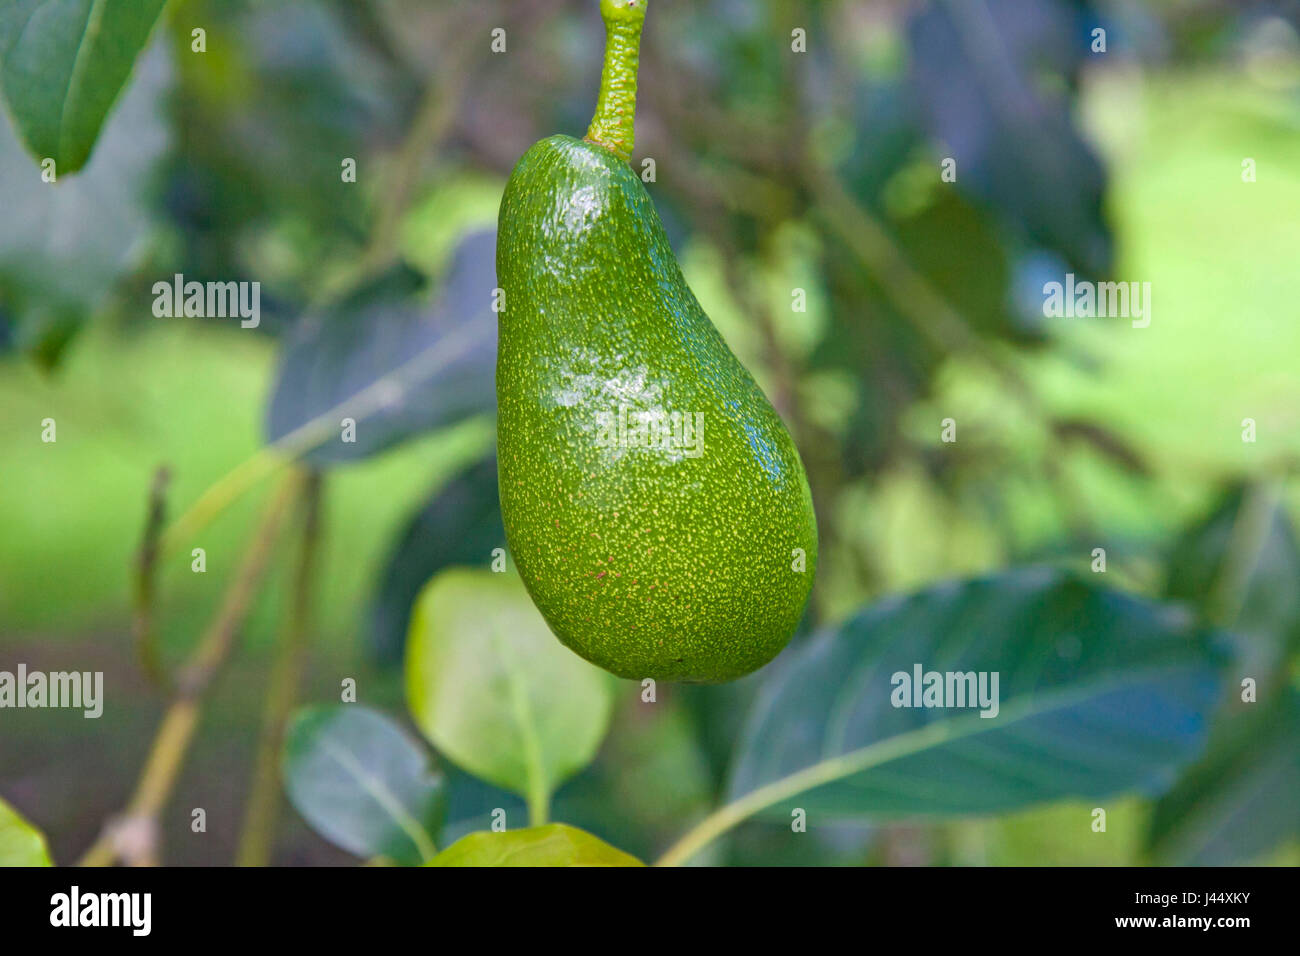 Single avocado pear hanging from a tree growing in a New Zealand garden Stock Photo